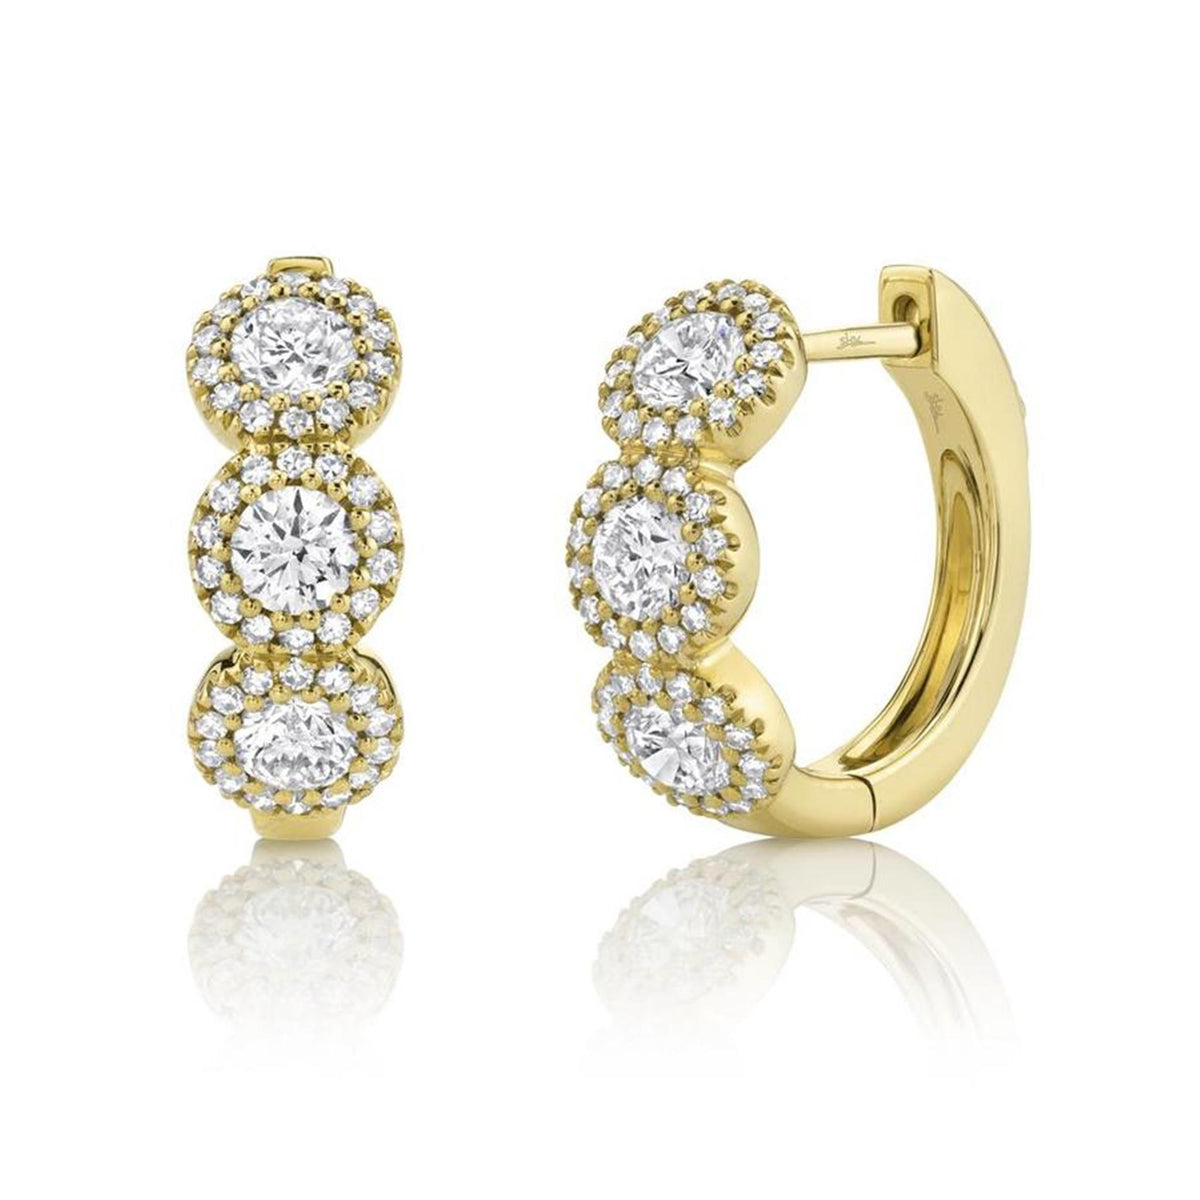 14Kt Yellow Gold Halo Earrings With 1.10cttw Natural Diamonds